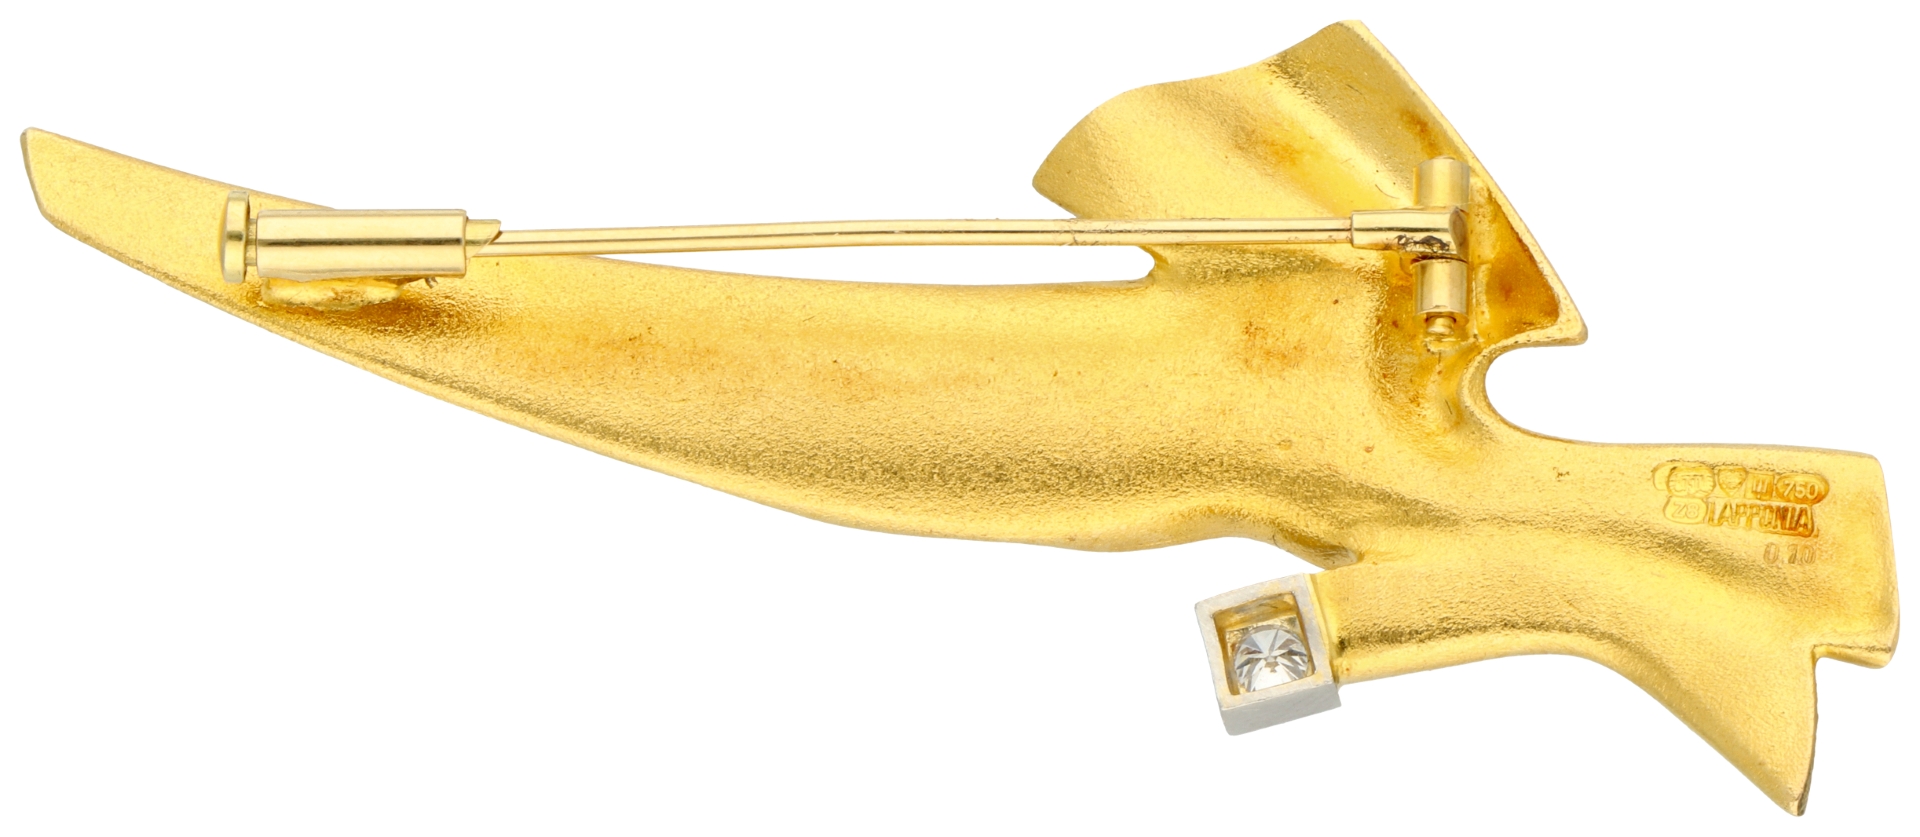 No Reserve - Lapponia 18k bicolor gold brooch set with diamond. - Image 2 of 3